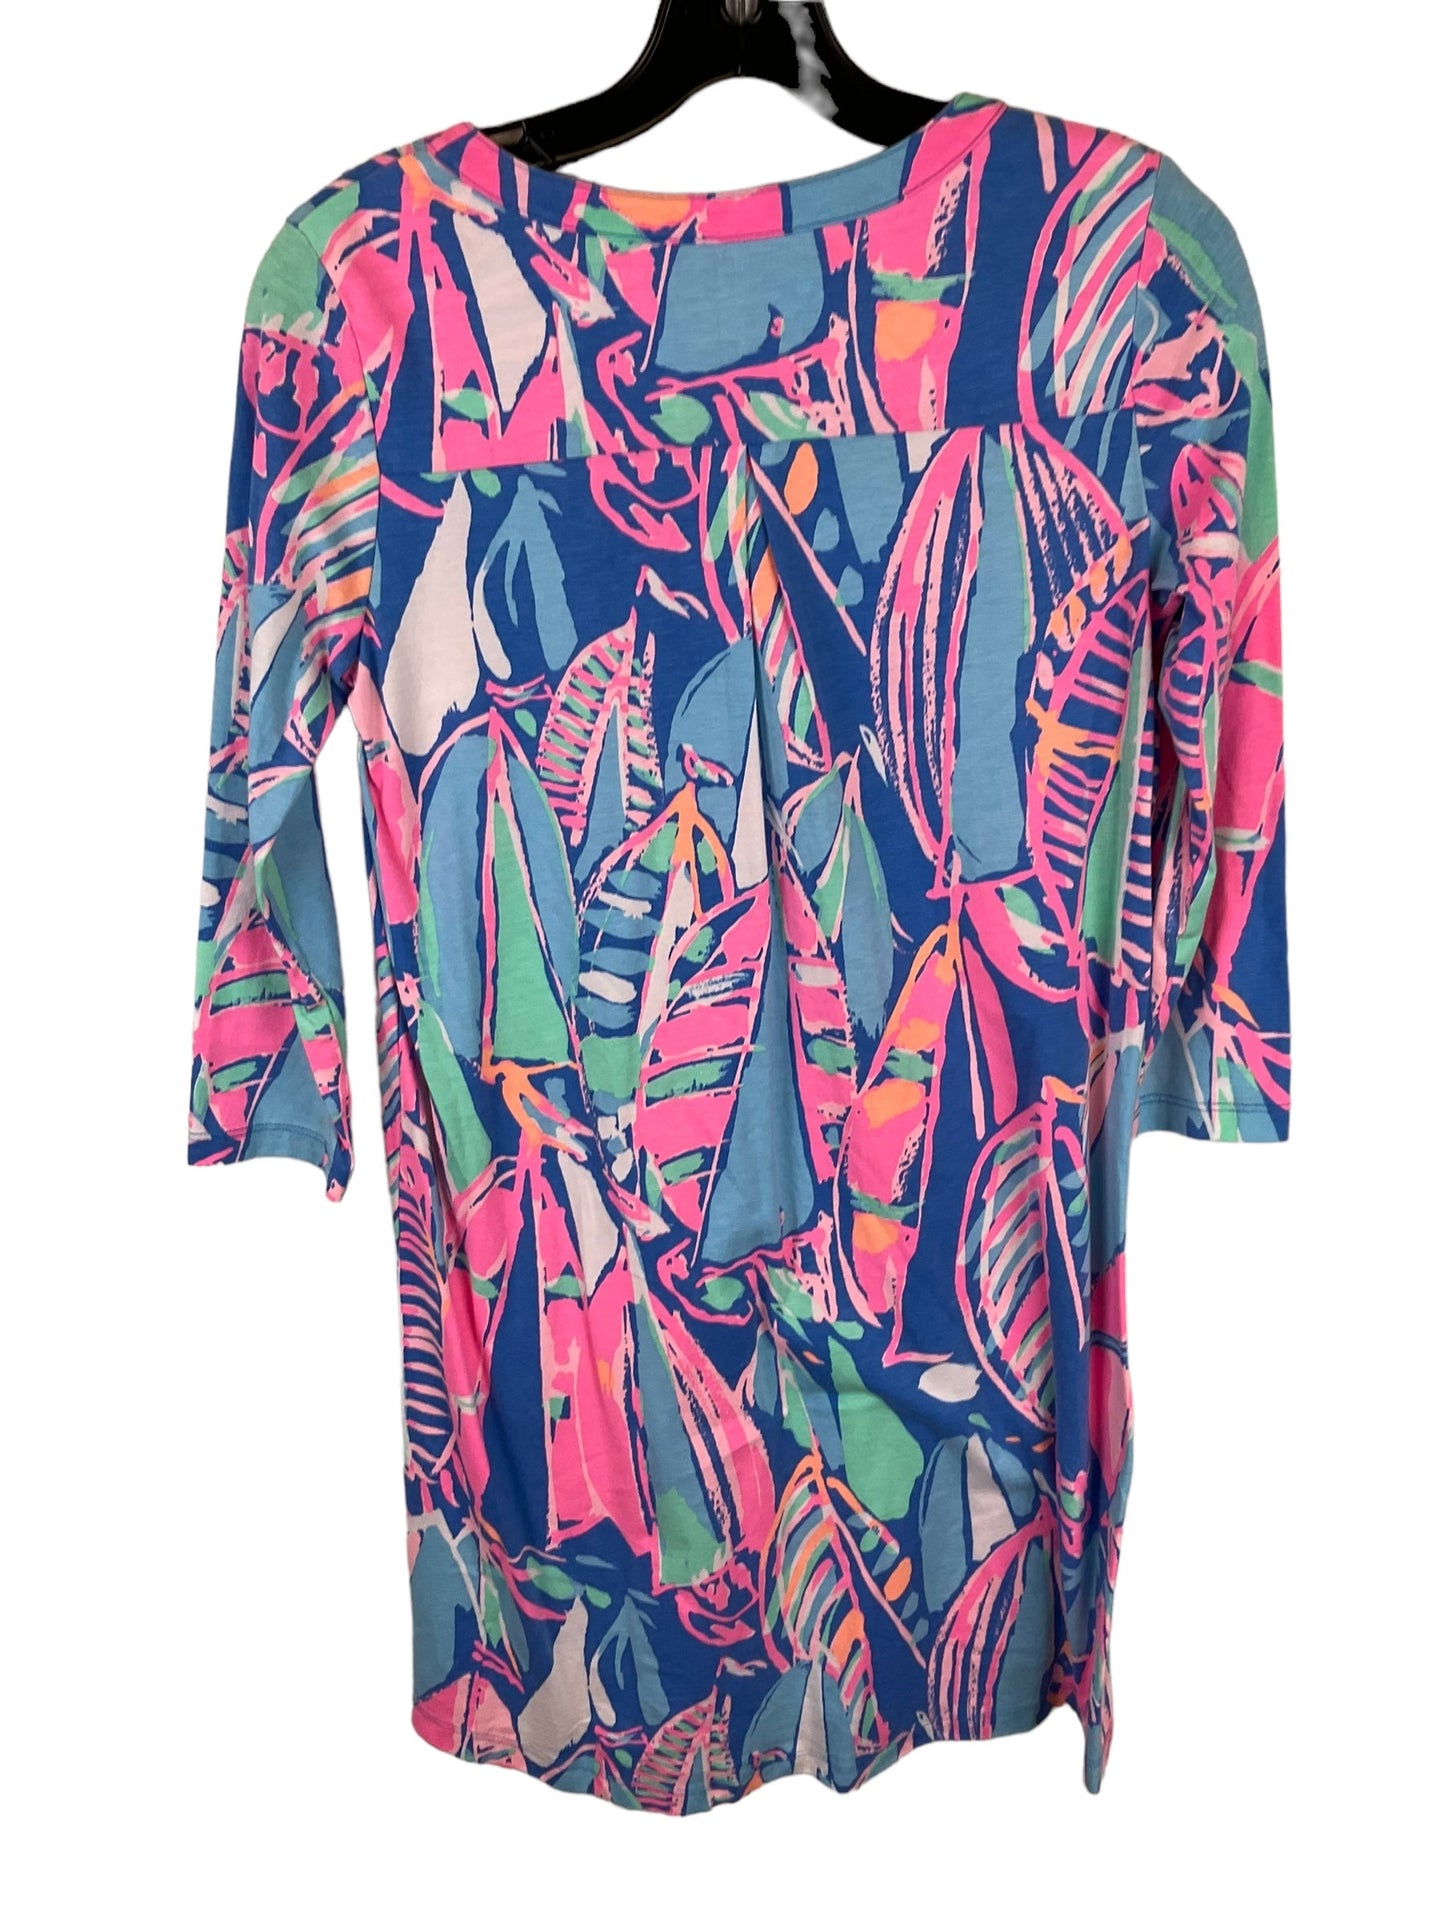 Dress Designer By Lilly Pulitzer  Size: XS